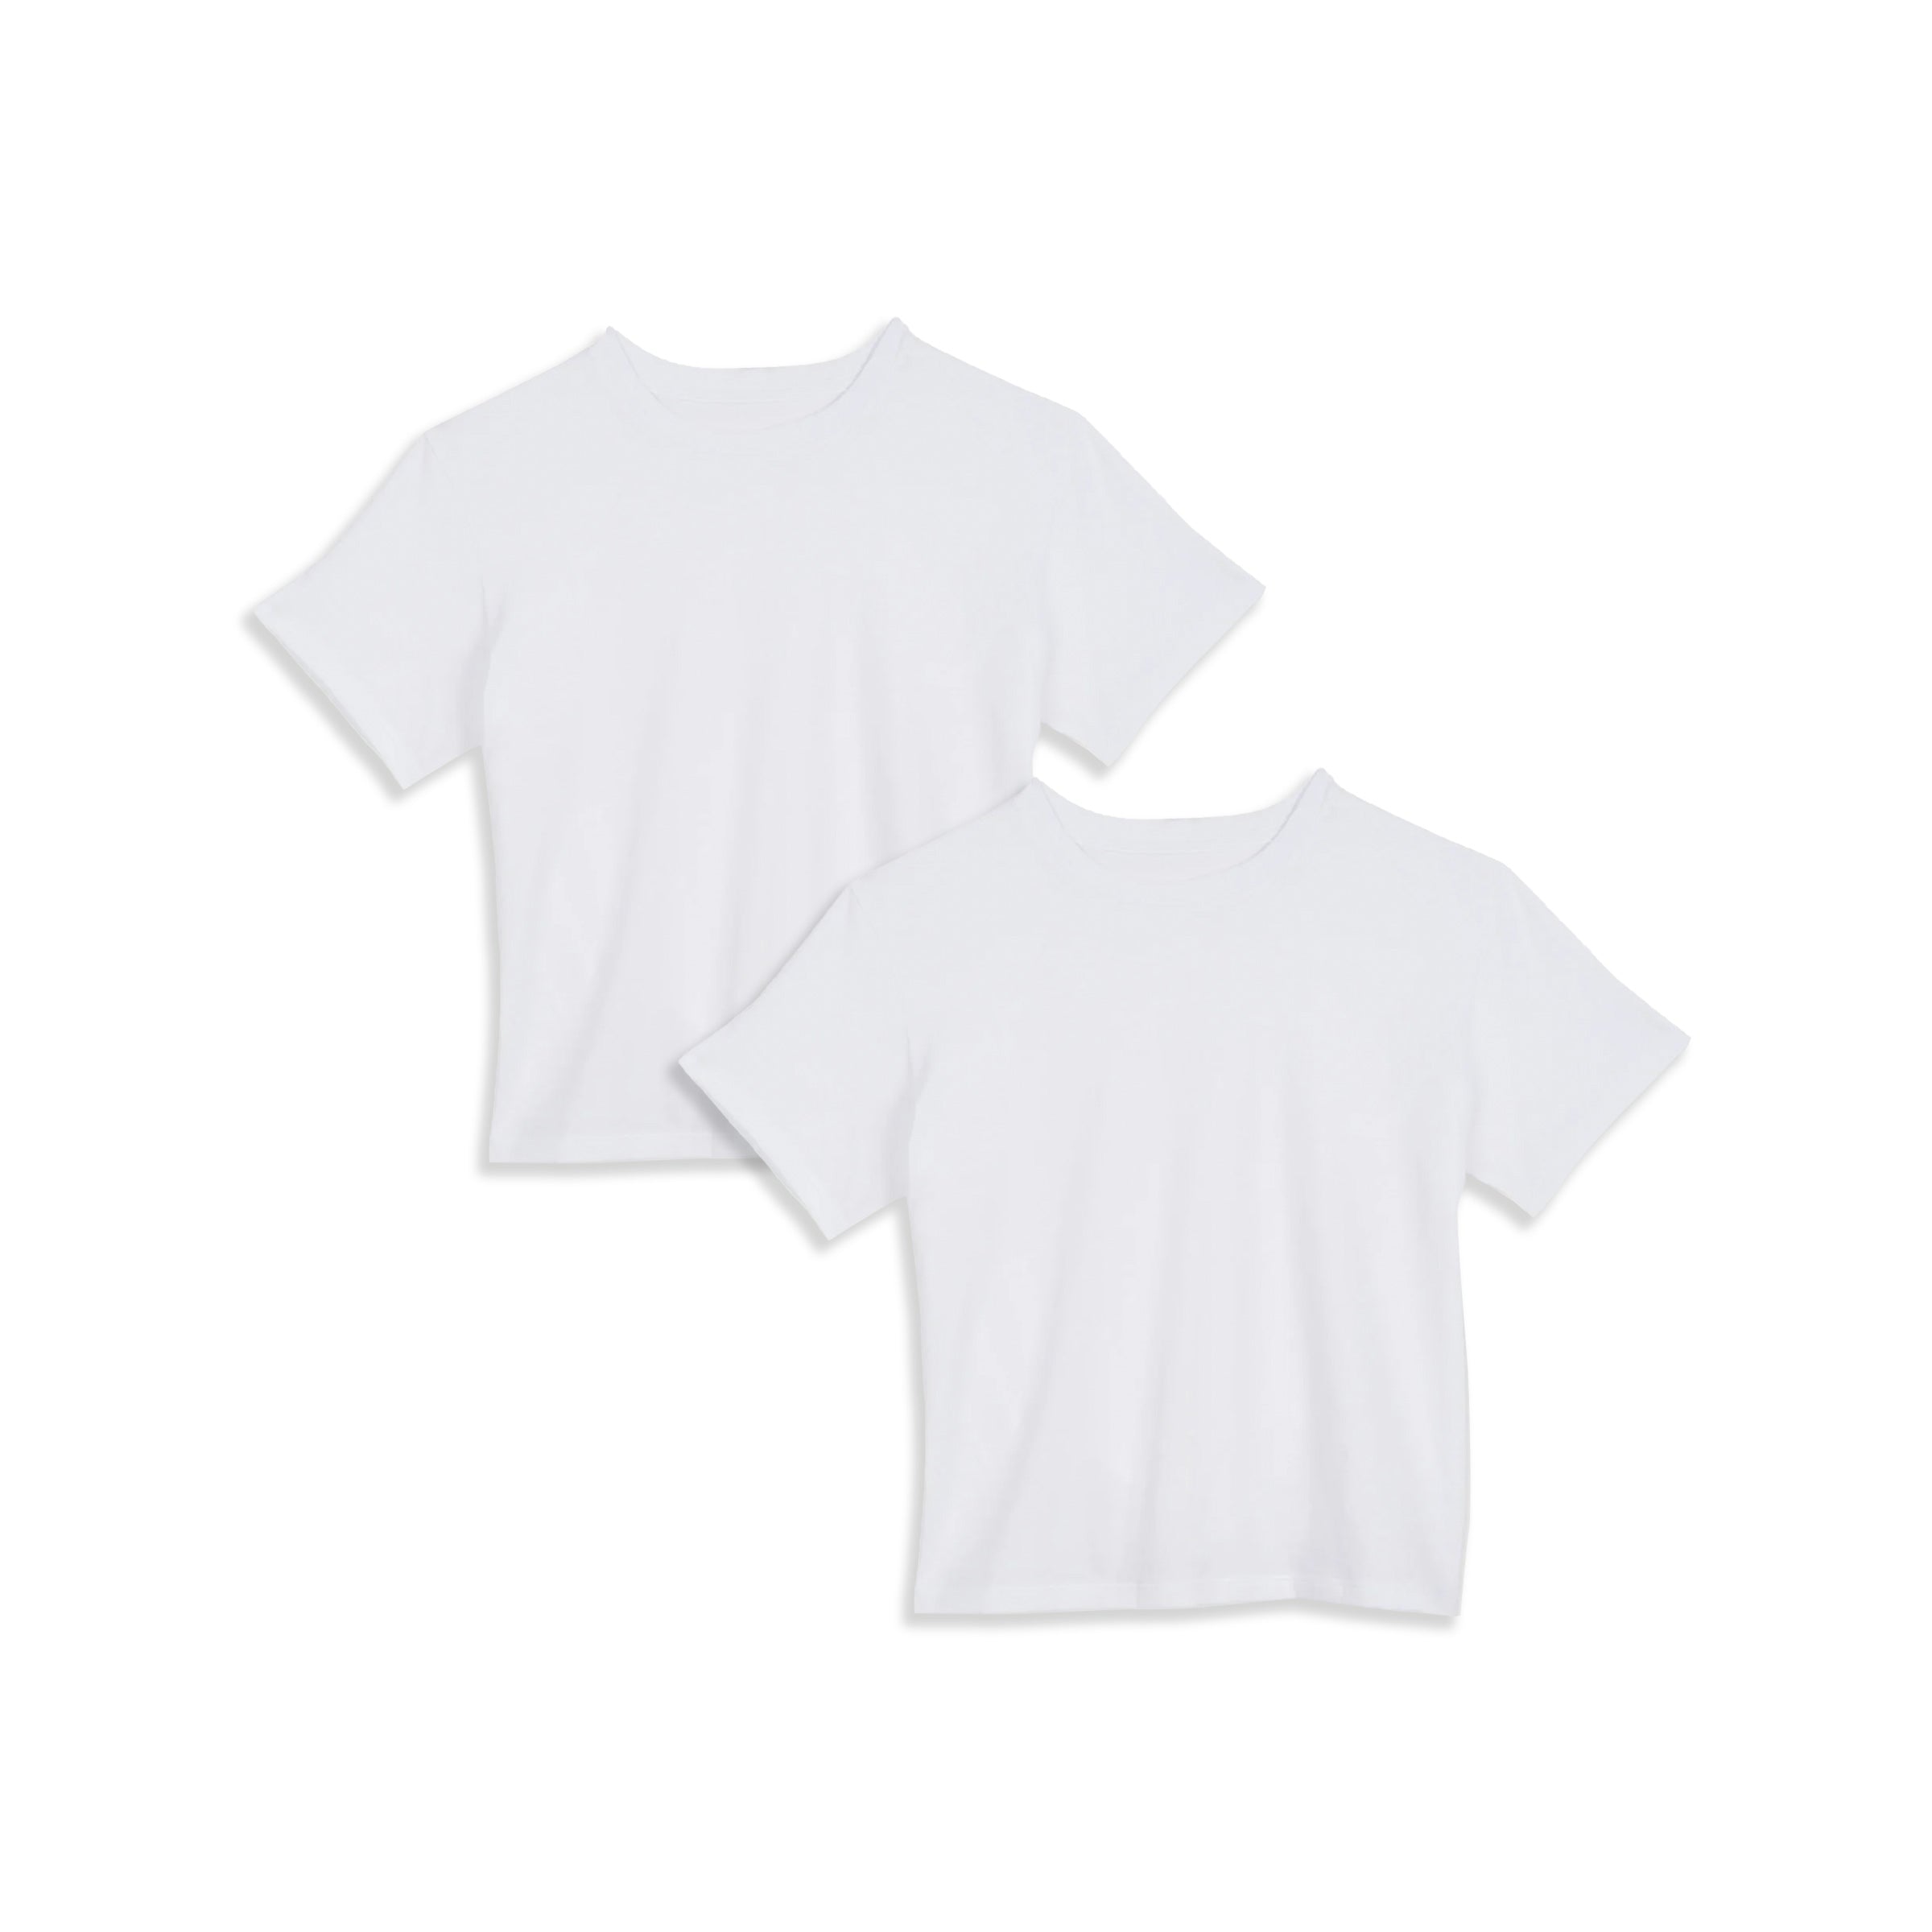 Women wearing White The Cotton Boxy Crew Tee 2-Pack tees